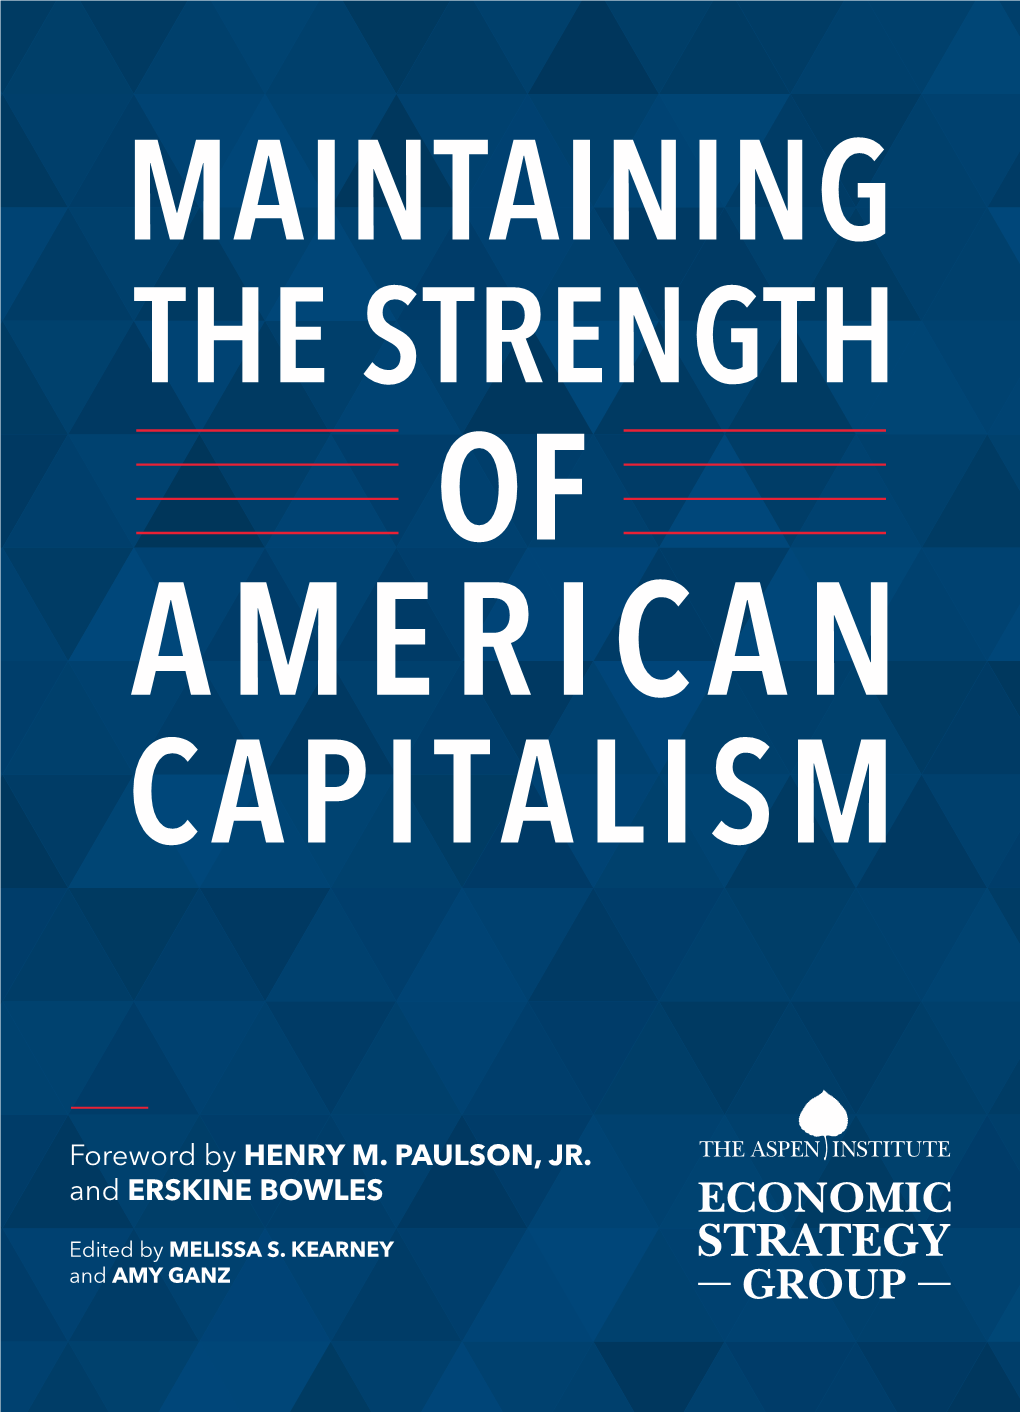 Maintaining the Strength of American Capitalism